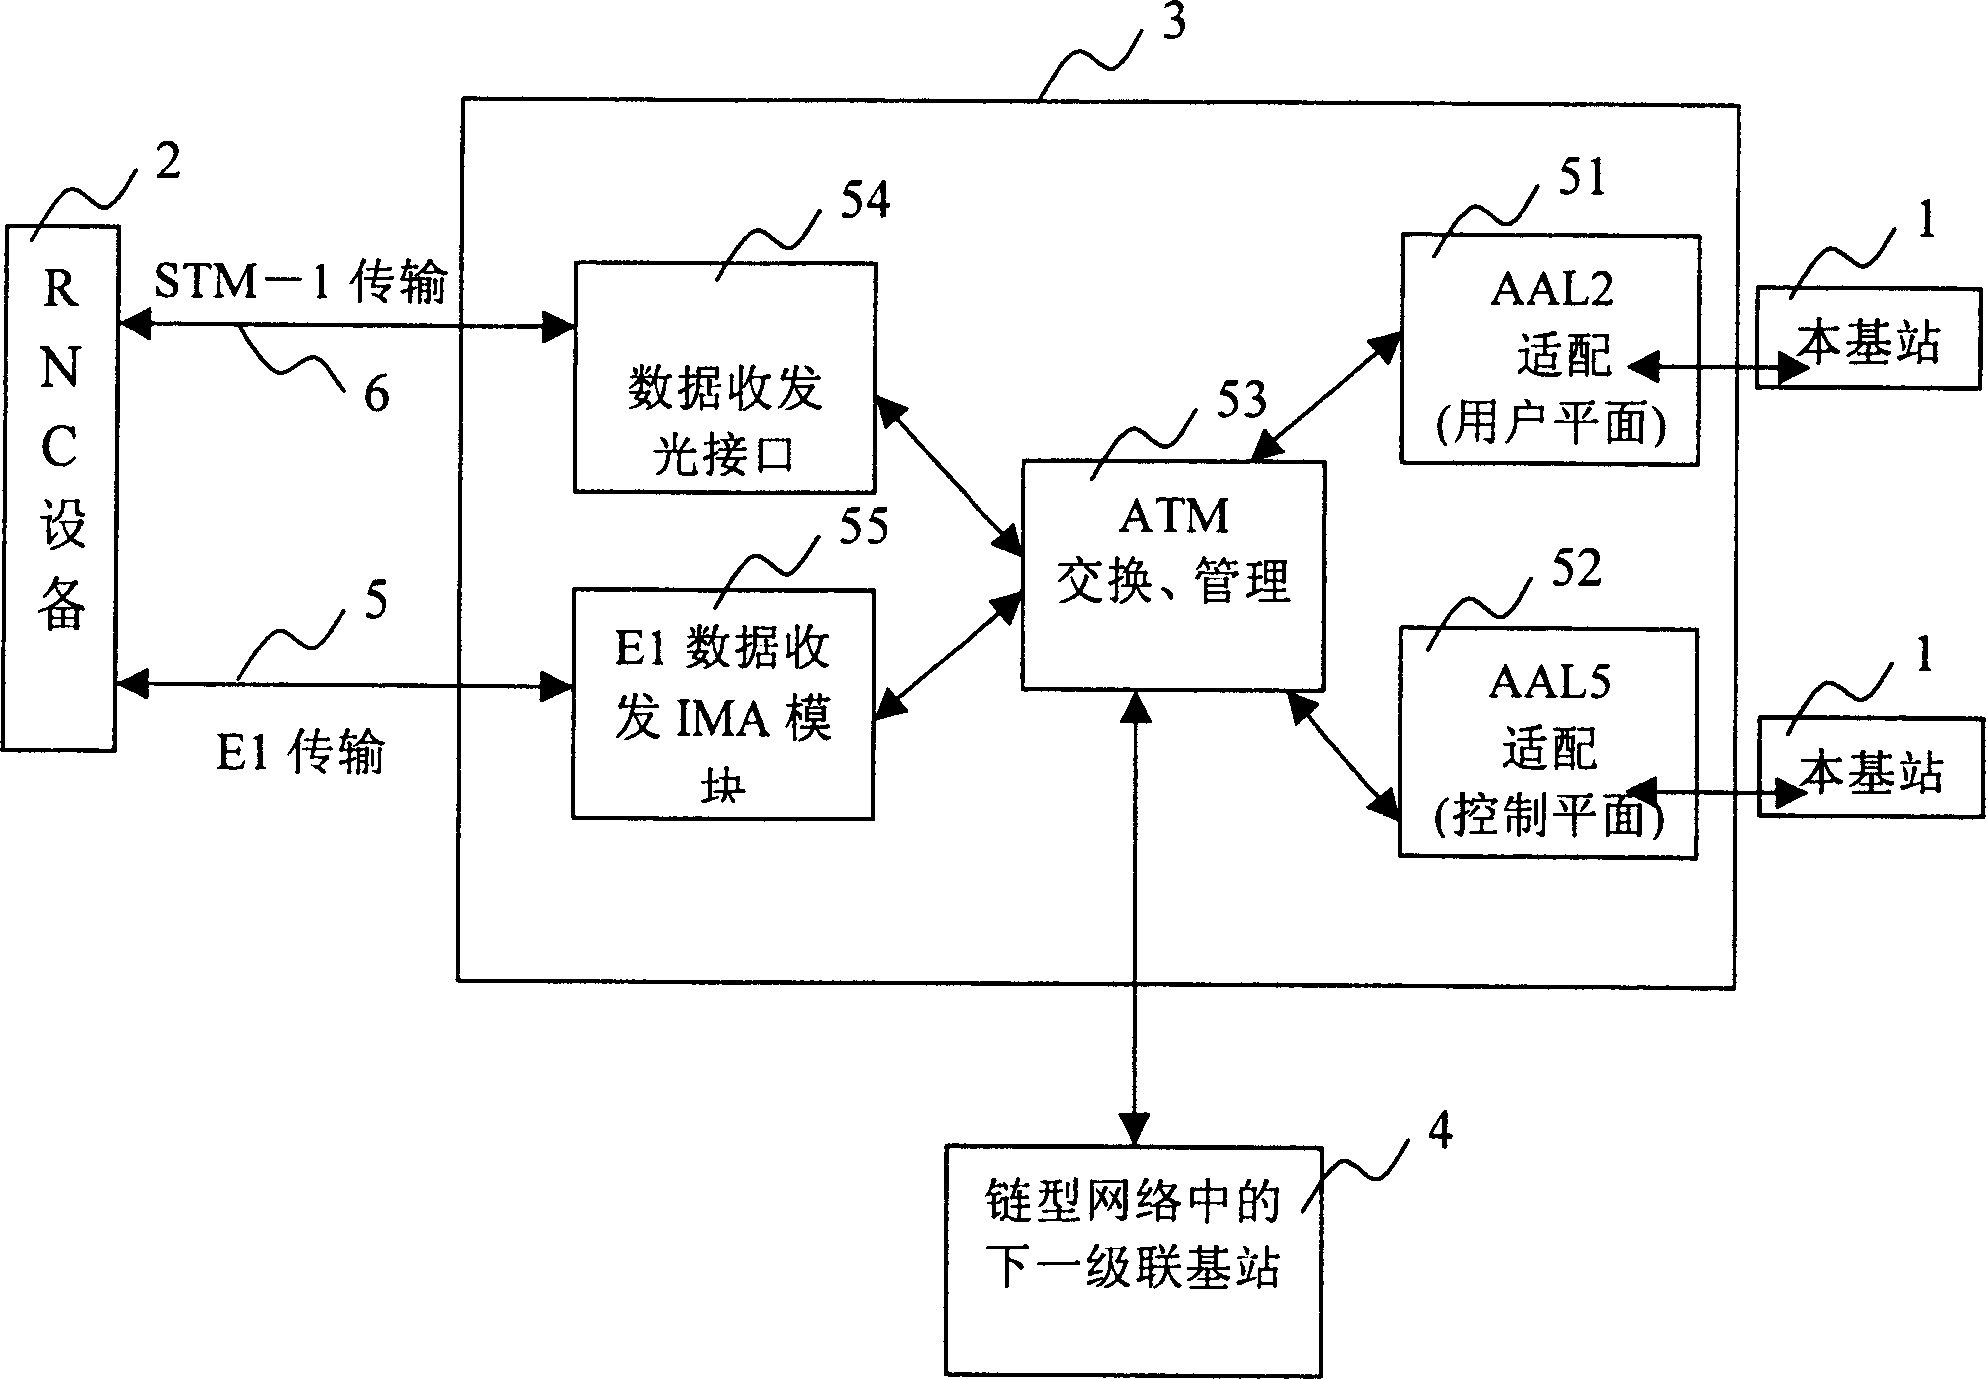 Apparatus and method for managing sub-station power of mobile communication system